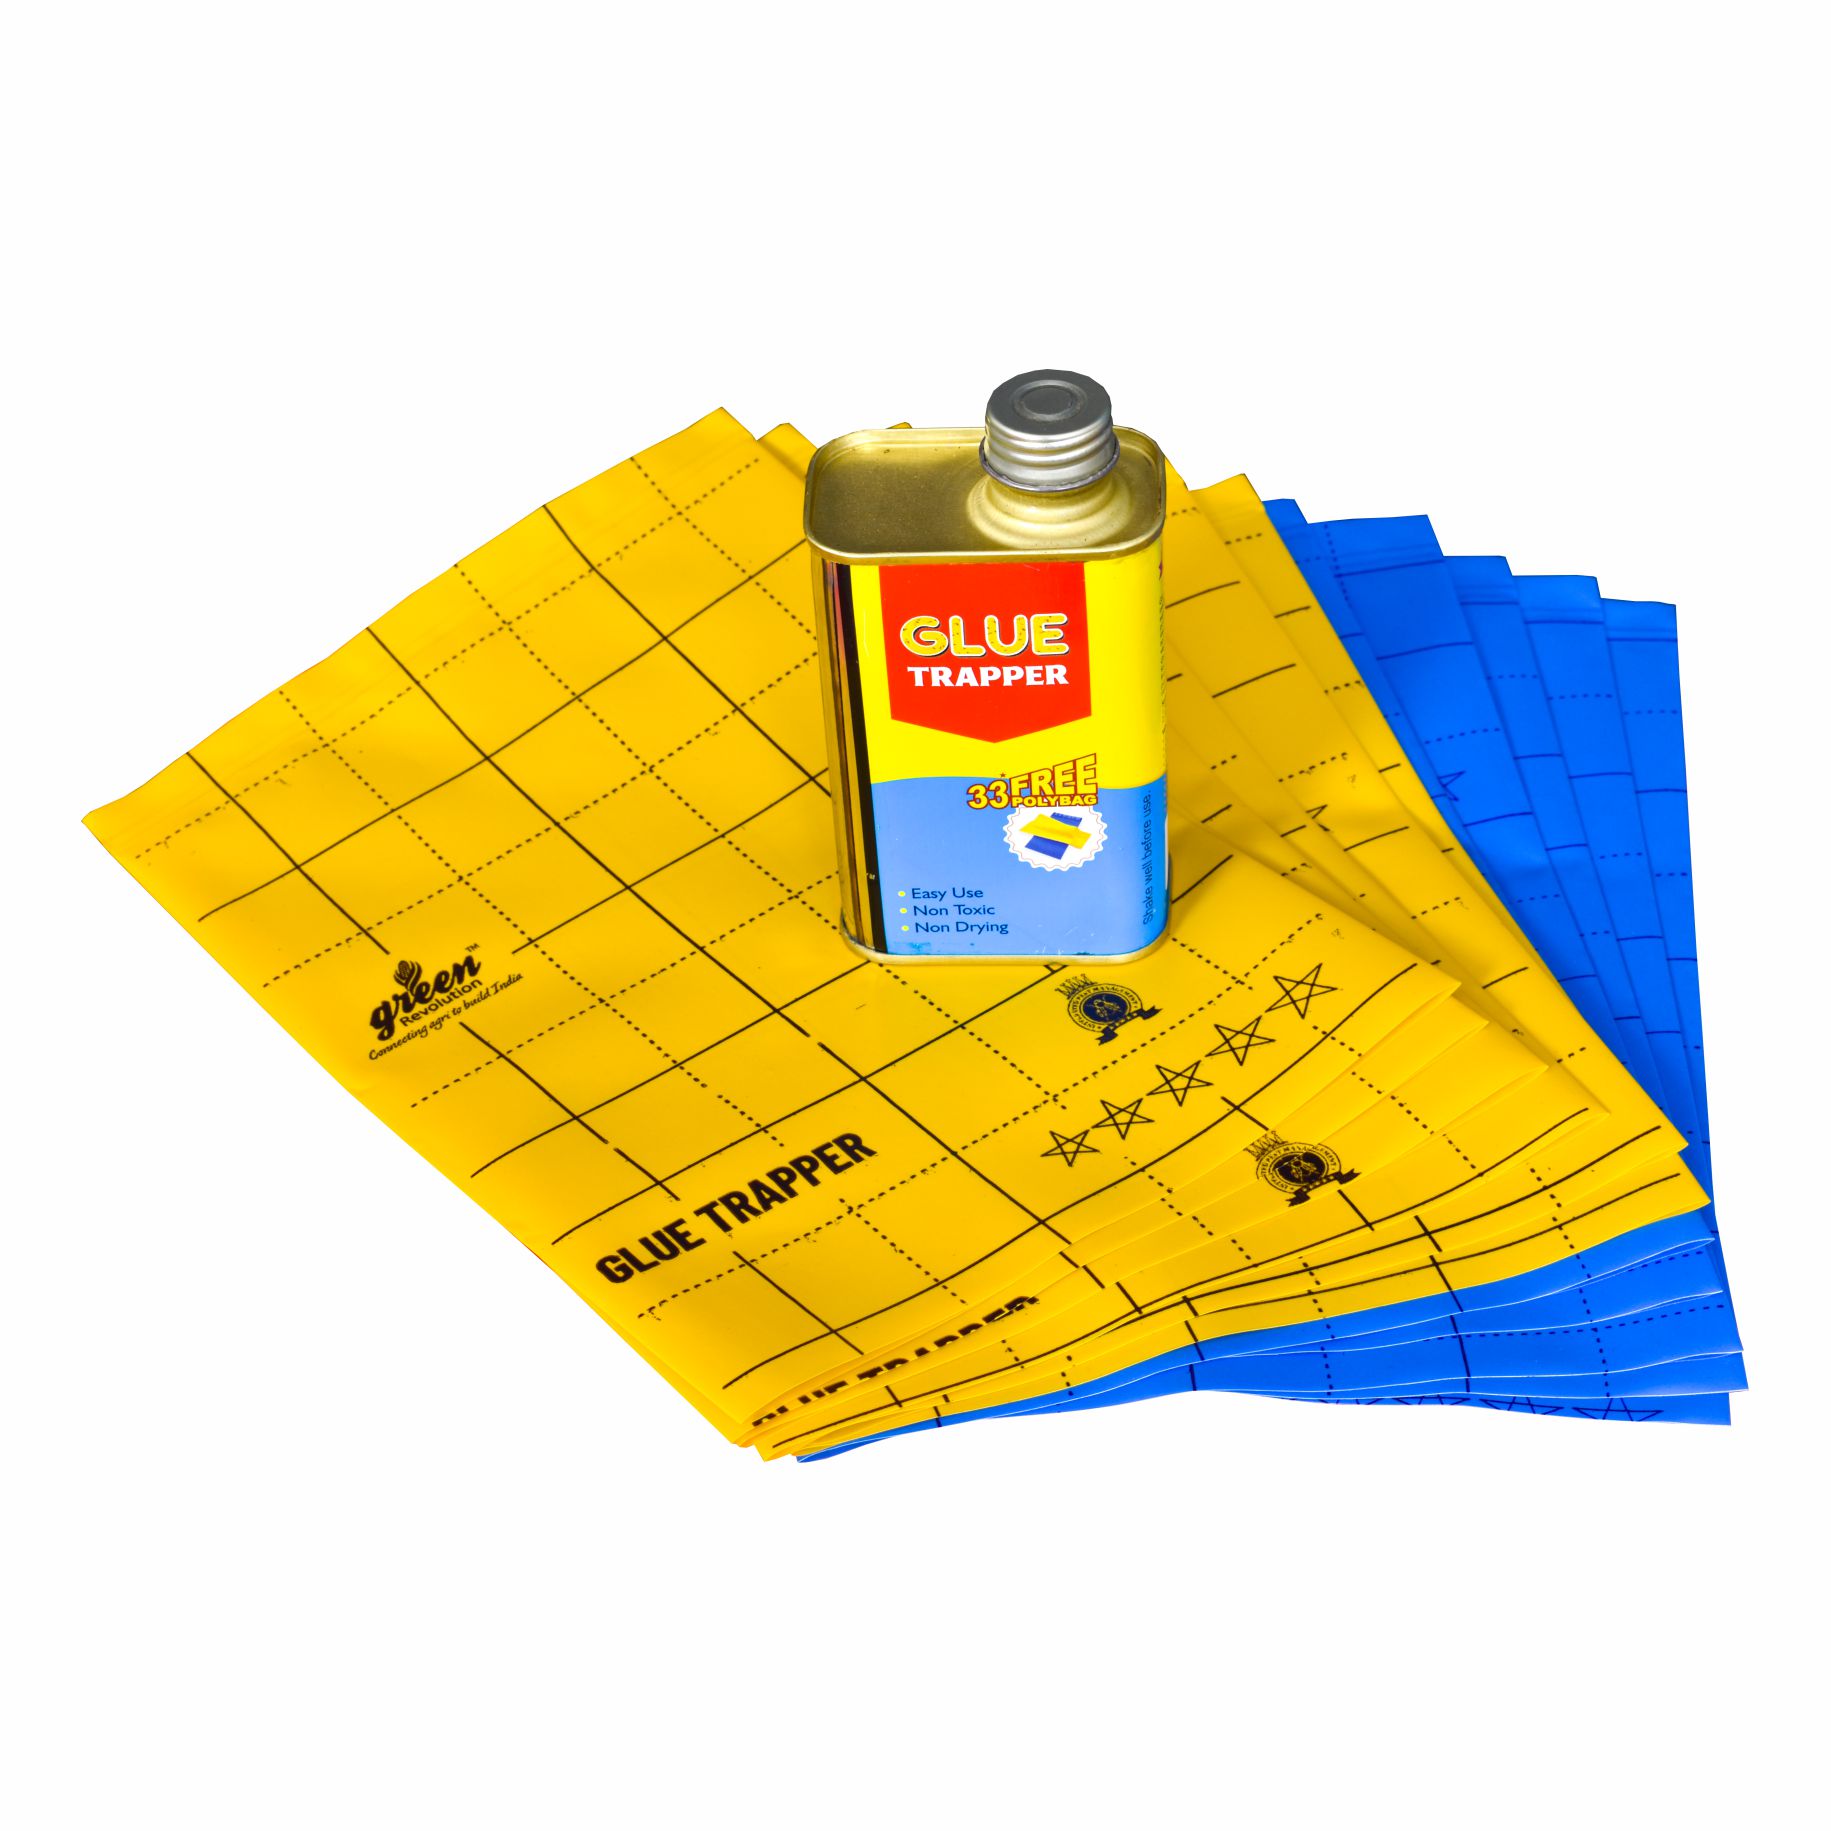 Glue Trapper 250ml with 33 free polybag ( Unit 1 )